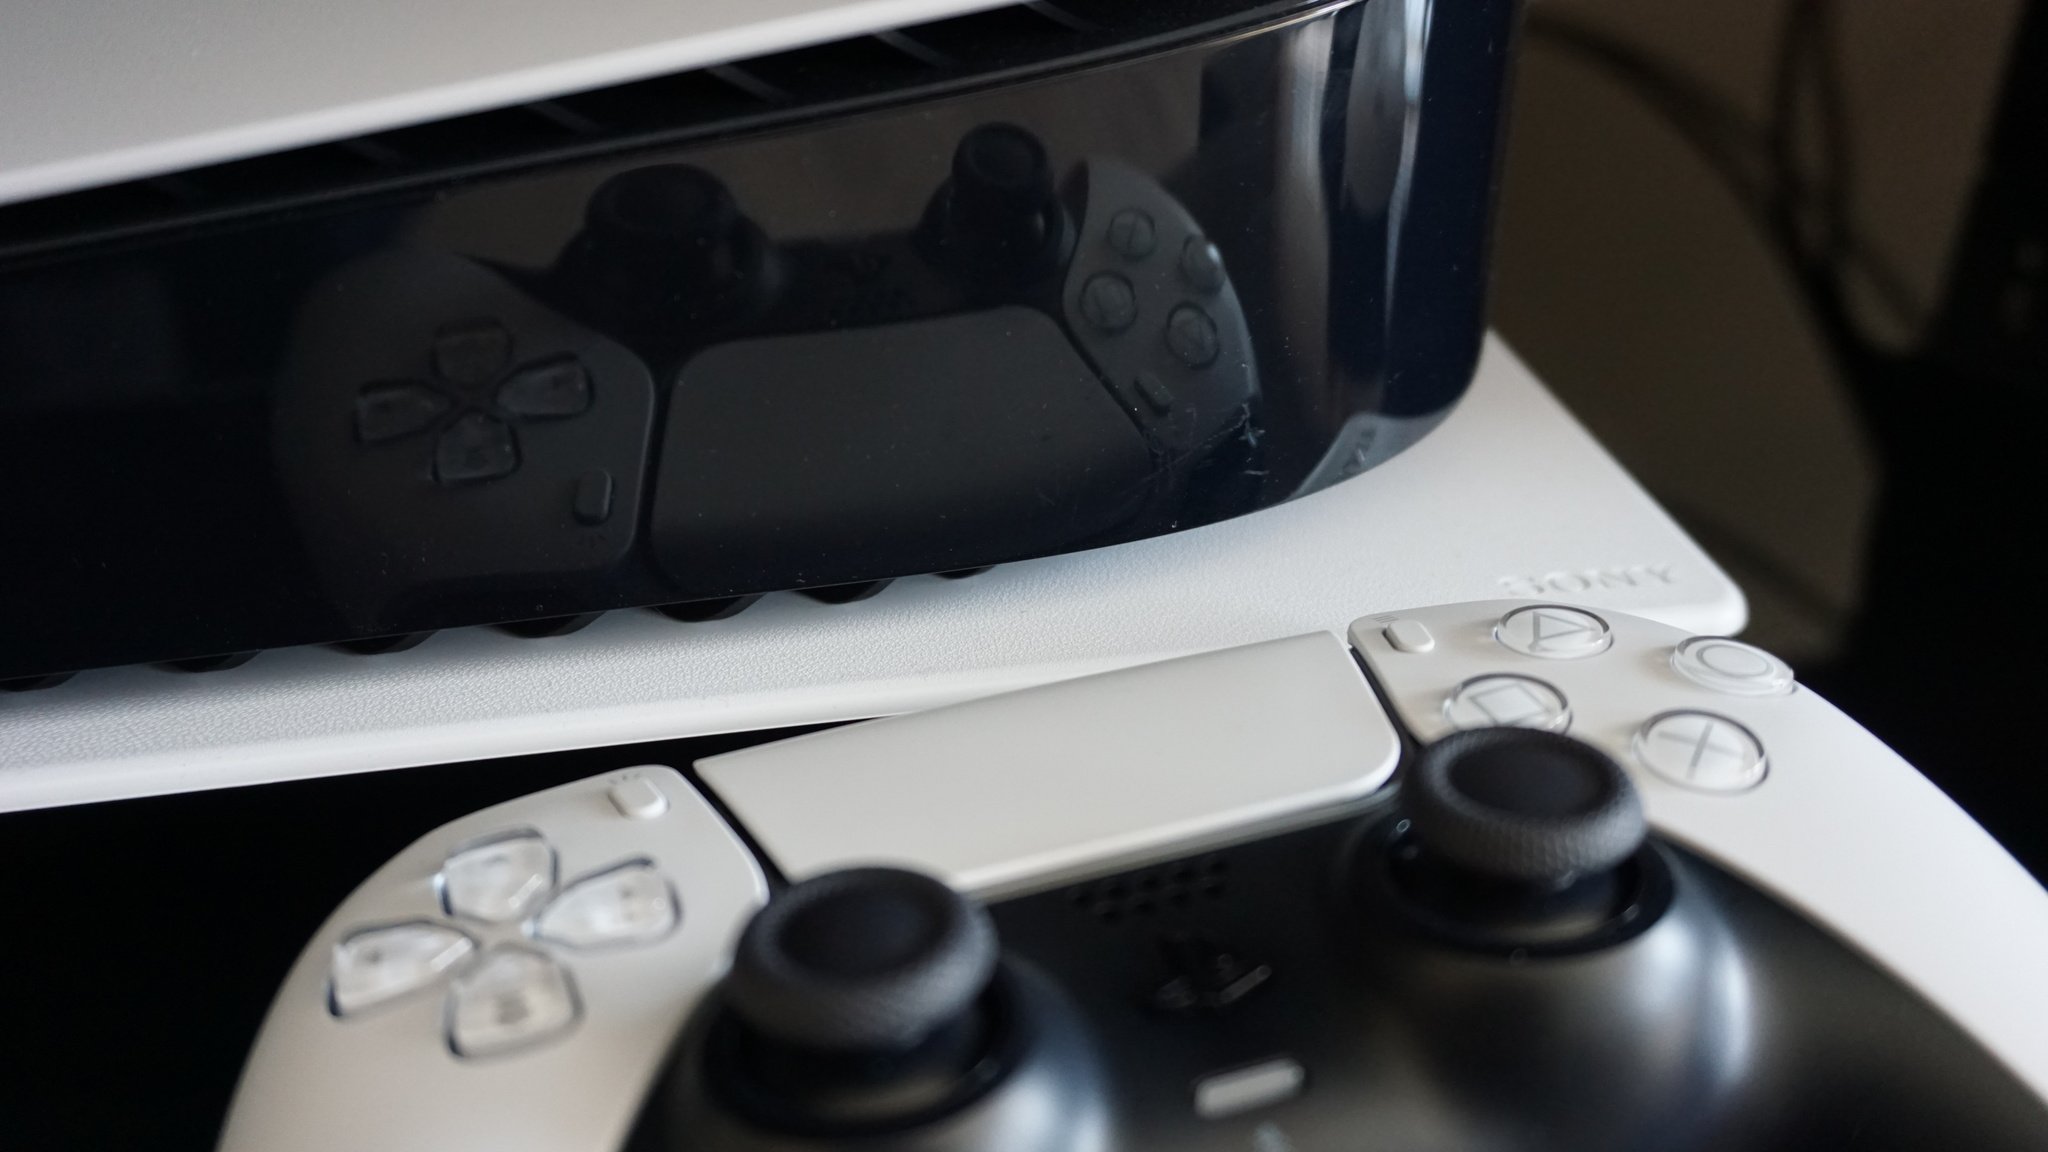 PlayStation: New PS4 System Update Causing Some Players Serious Issues